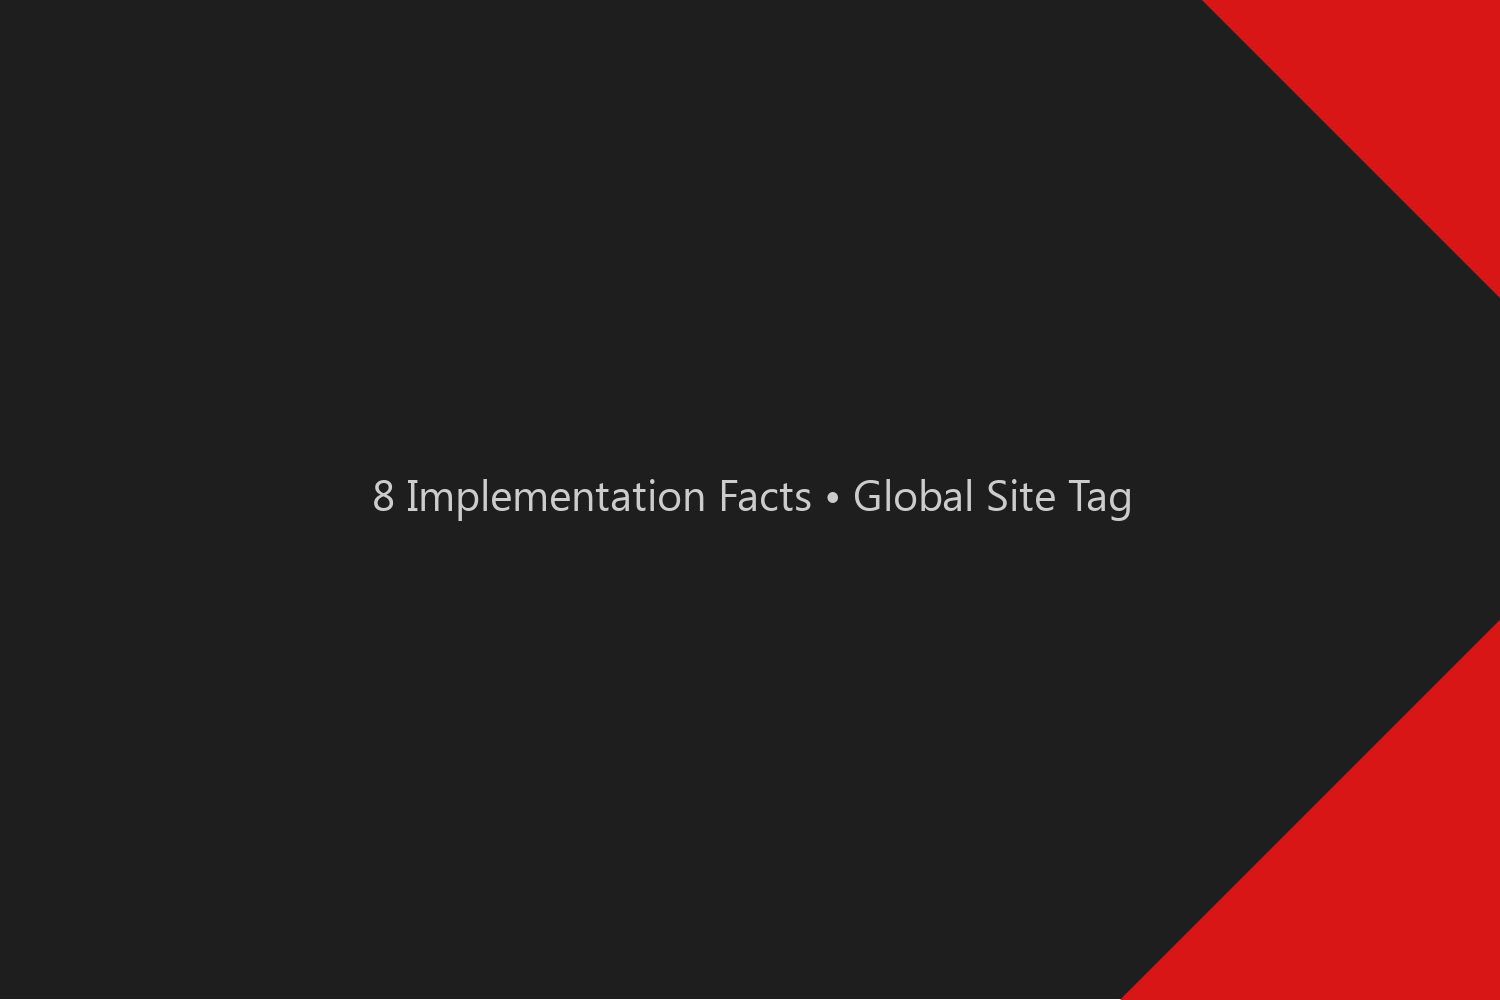 8 Implementation Facts • Global Site Tag